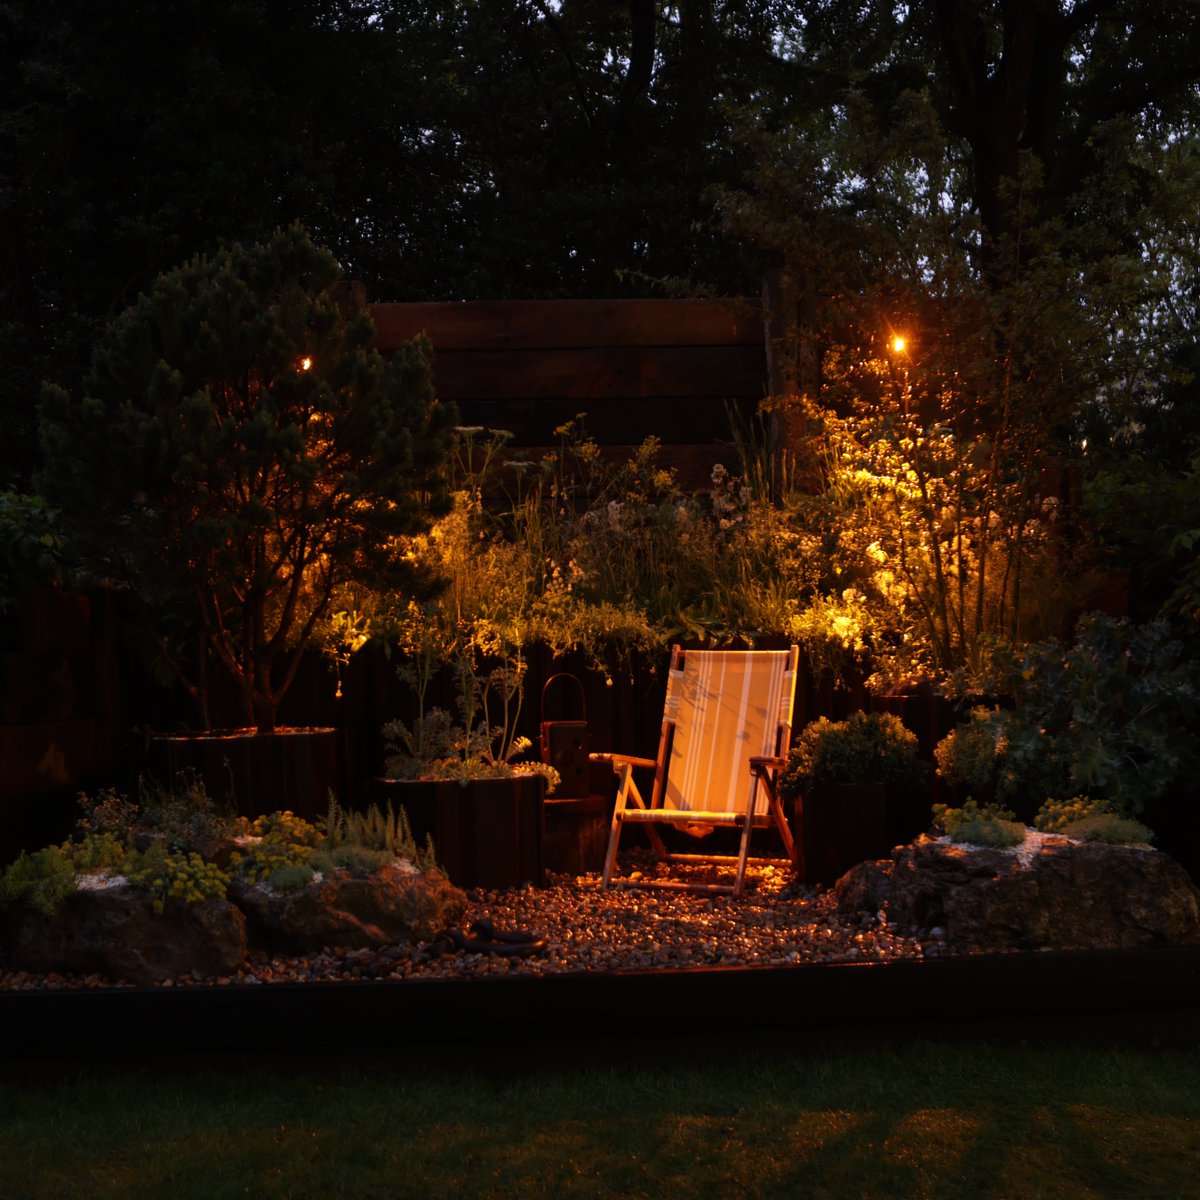 Night time at the changing tides garden at @the_rhs @rhschelsea flower show. A beautiful design and execution from @la_la_landscape_design for @mgrllp_ The lighting used is dark skies friendly - downward facing in 1800K. Well deserved Gold for the garden too! #gardenlighting